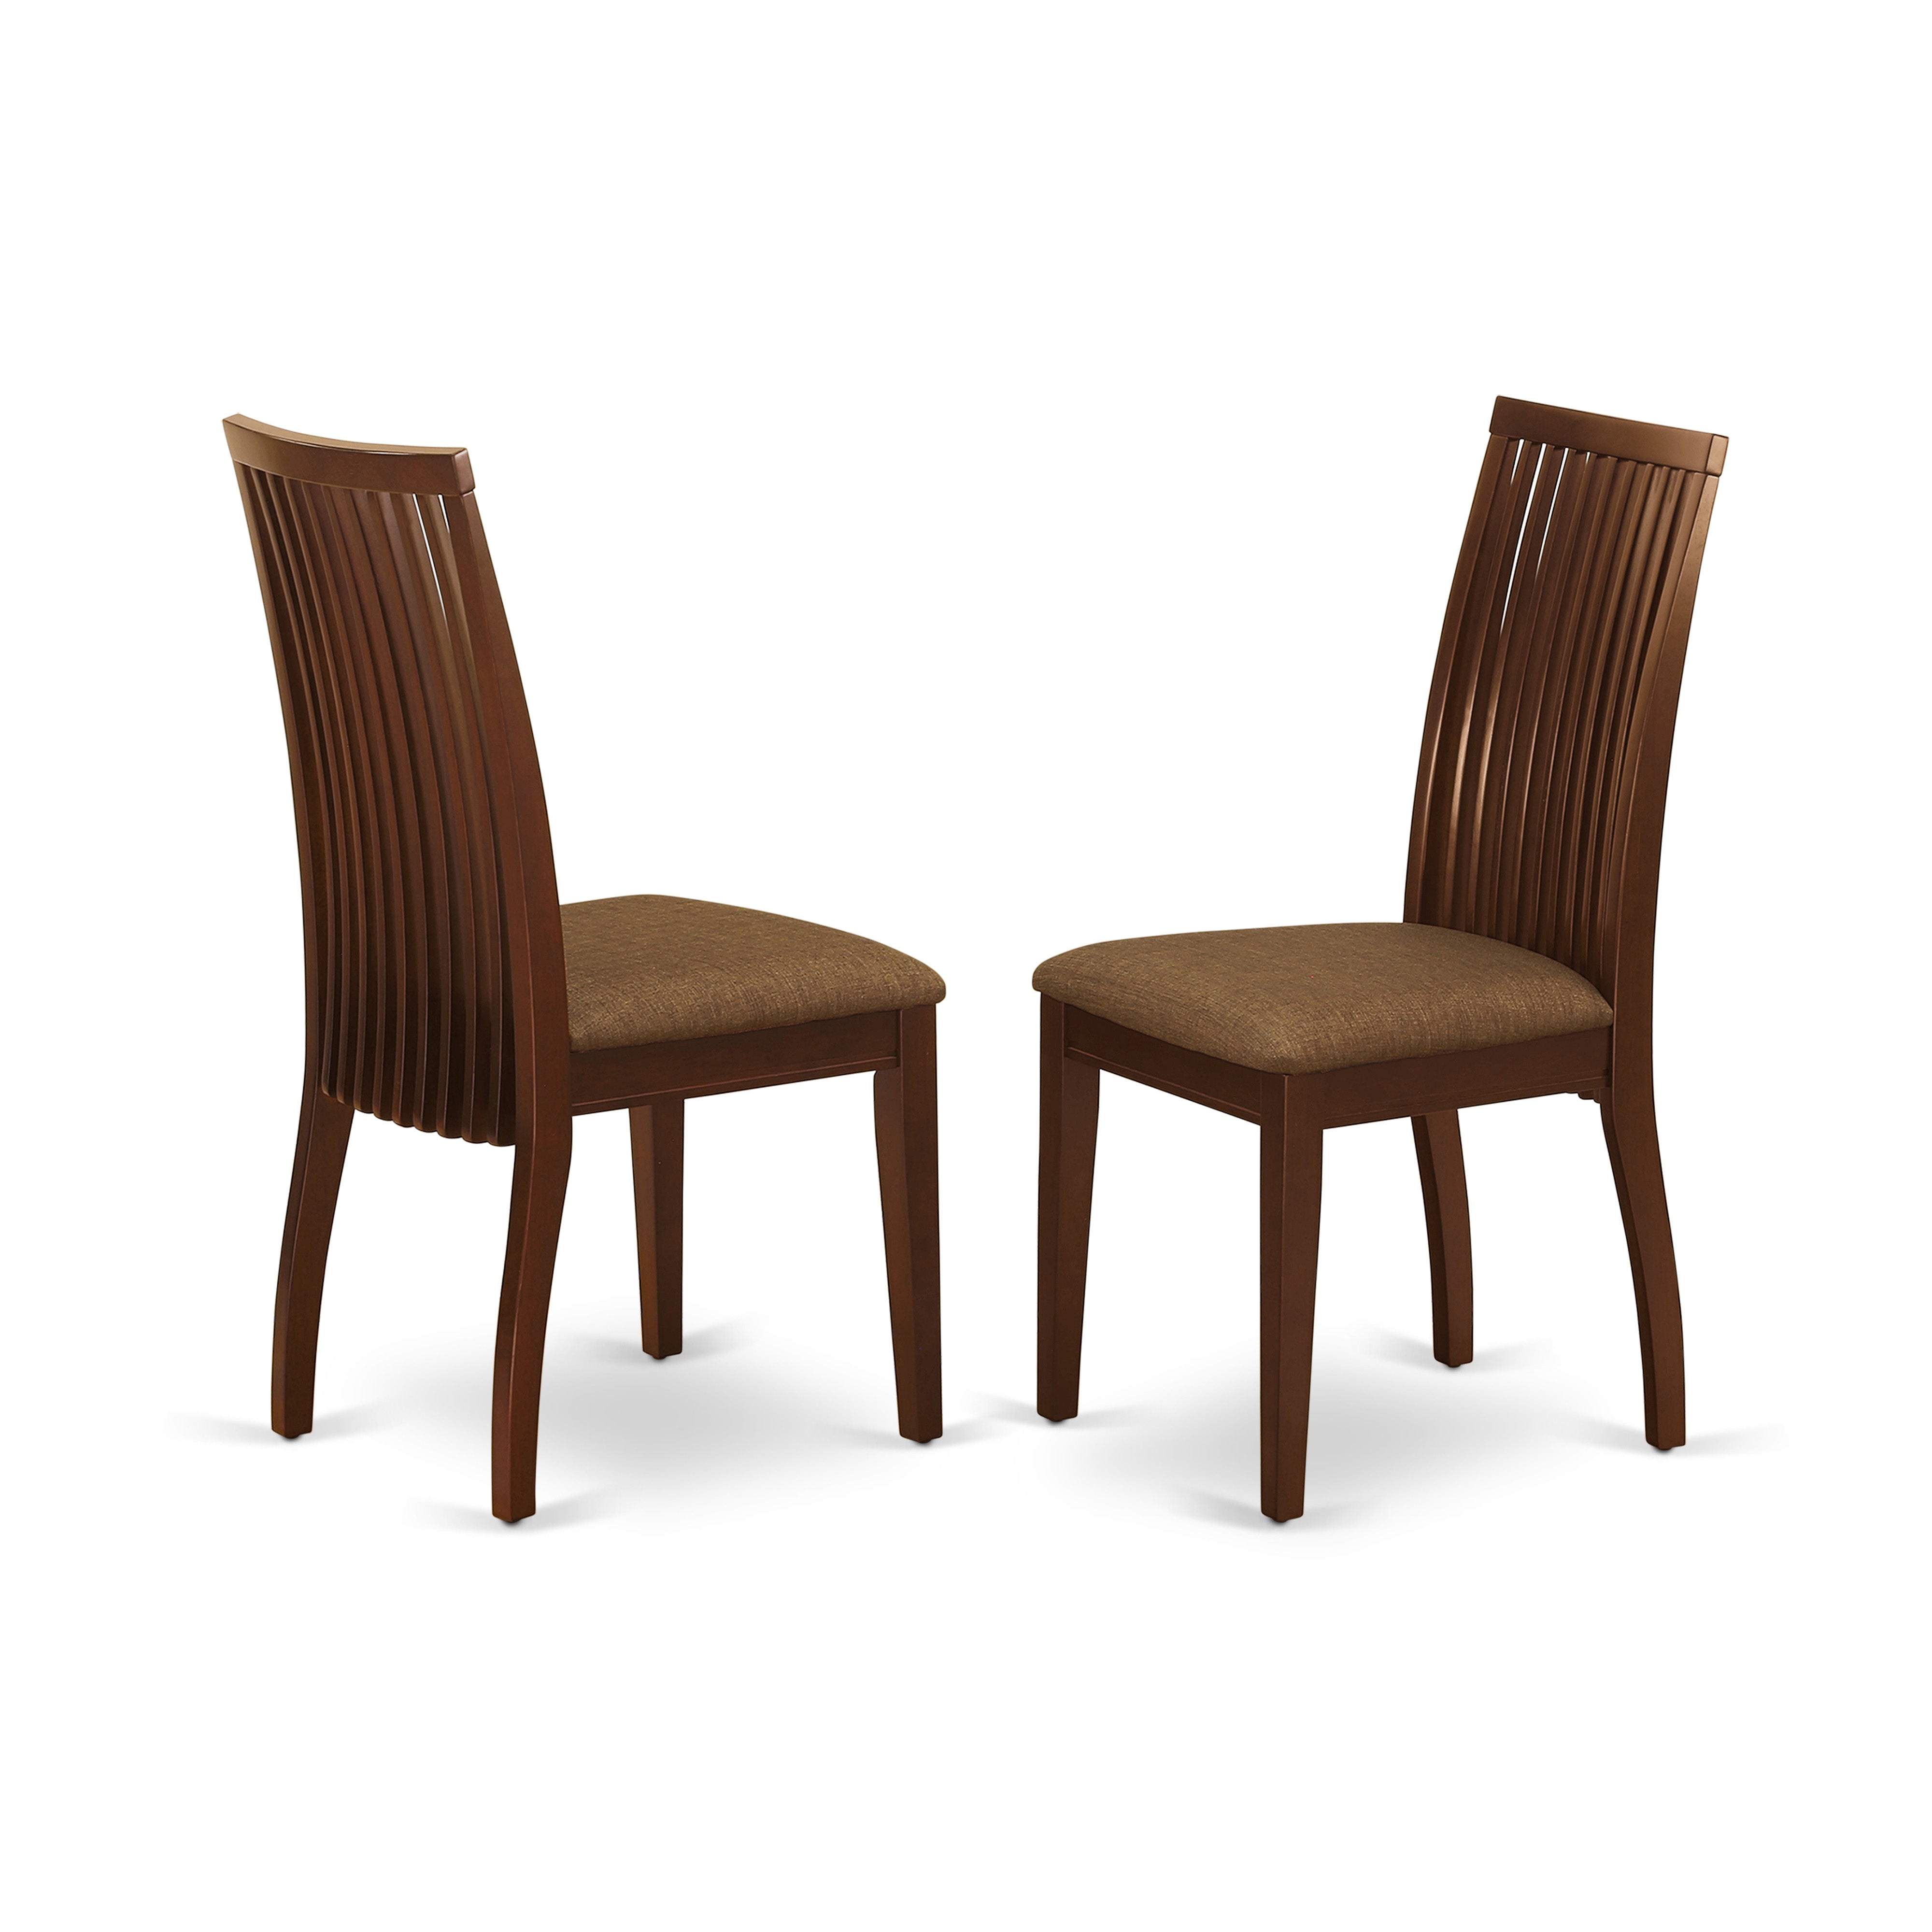 IPC-MAH-C Ipswich Dining chair with Linen Fabric Upholstered Sea in Mahogany finish